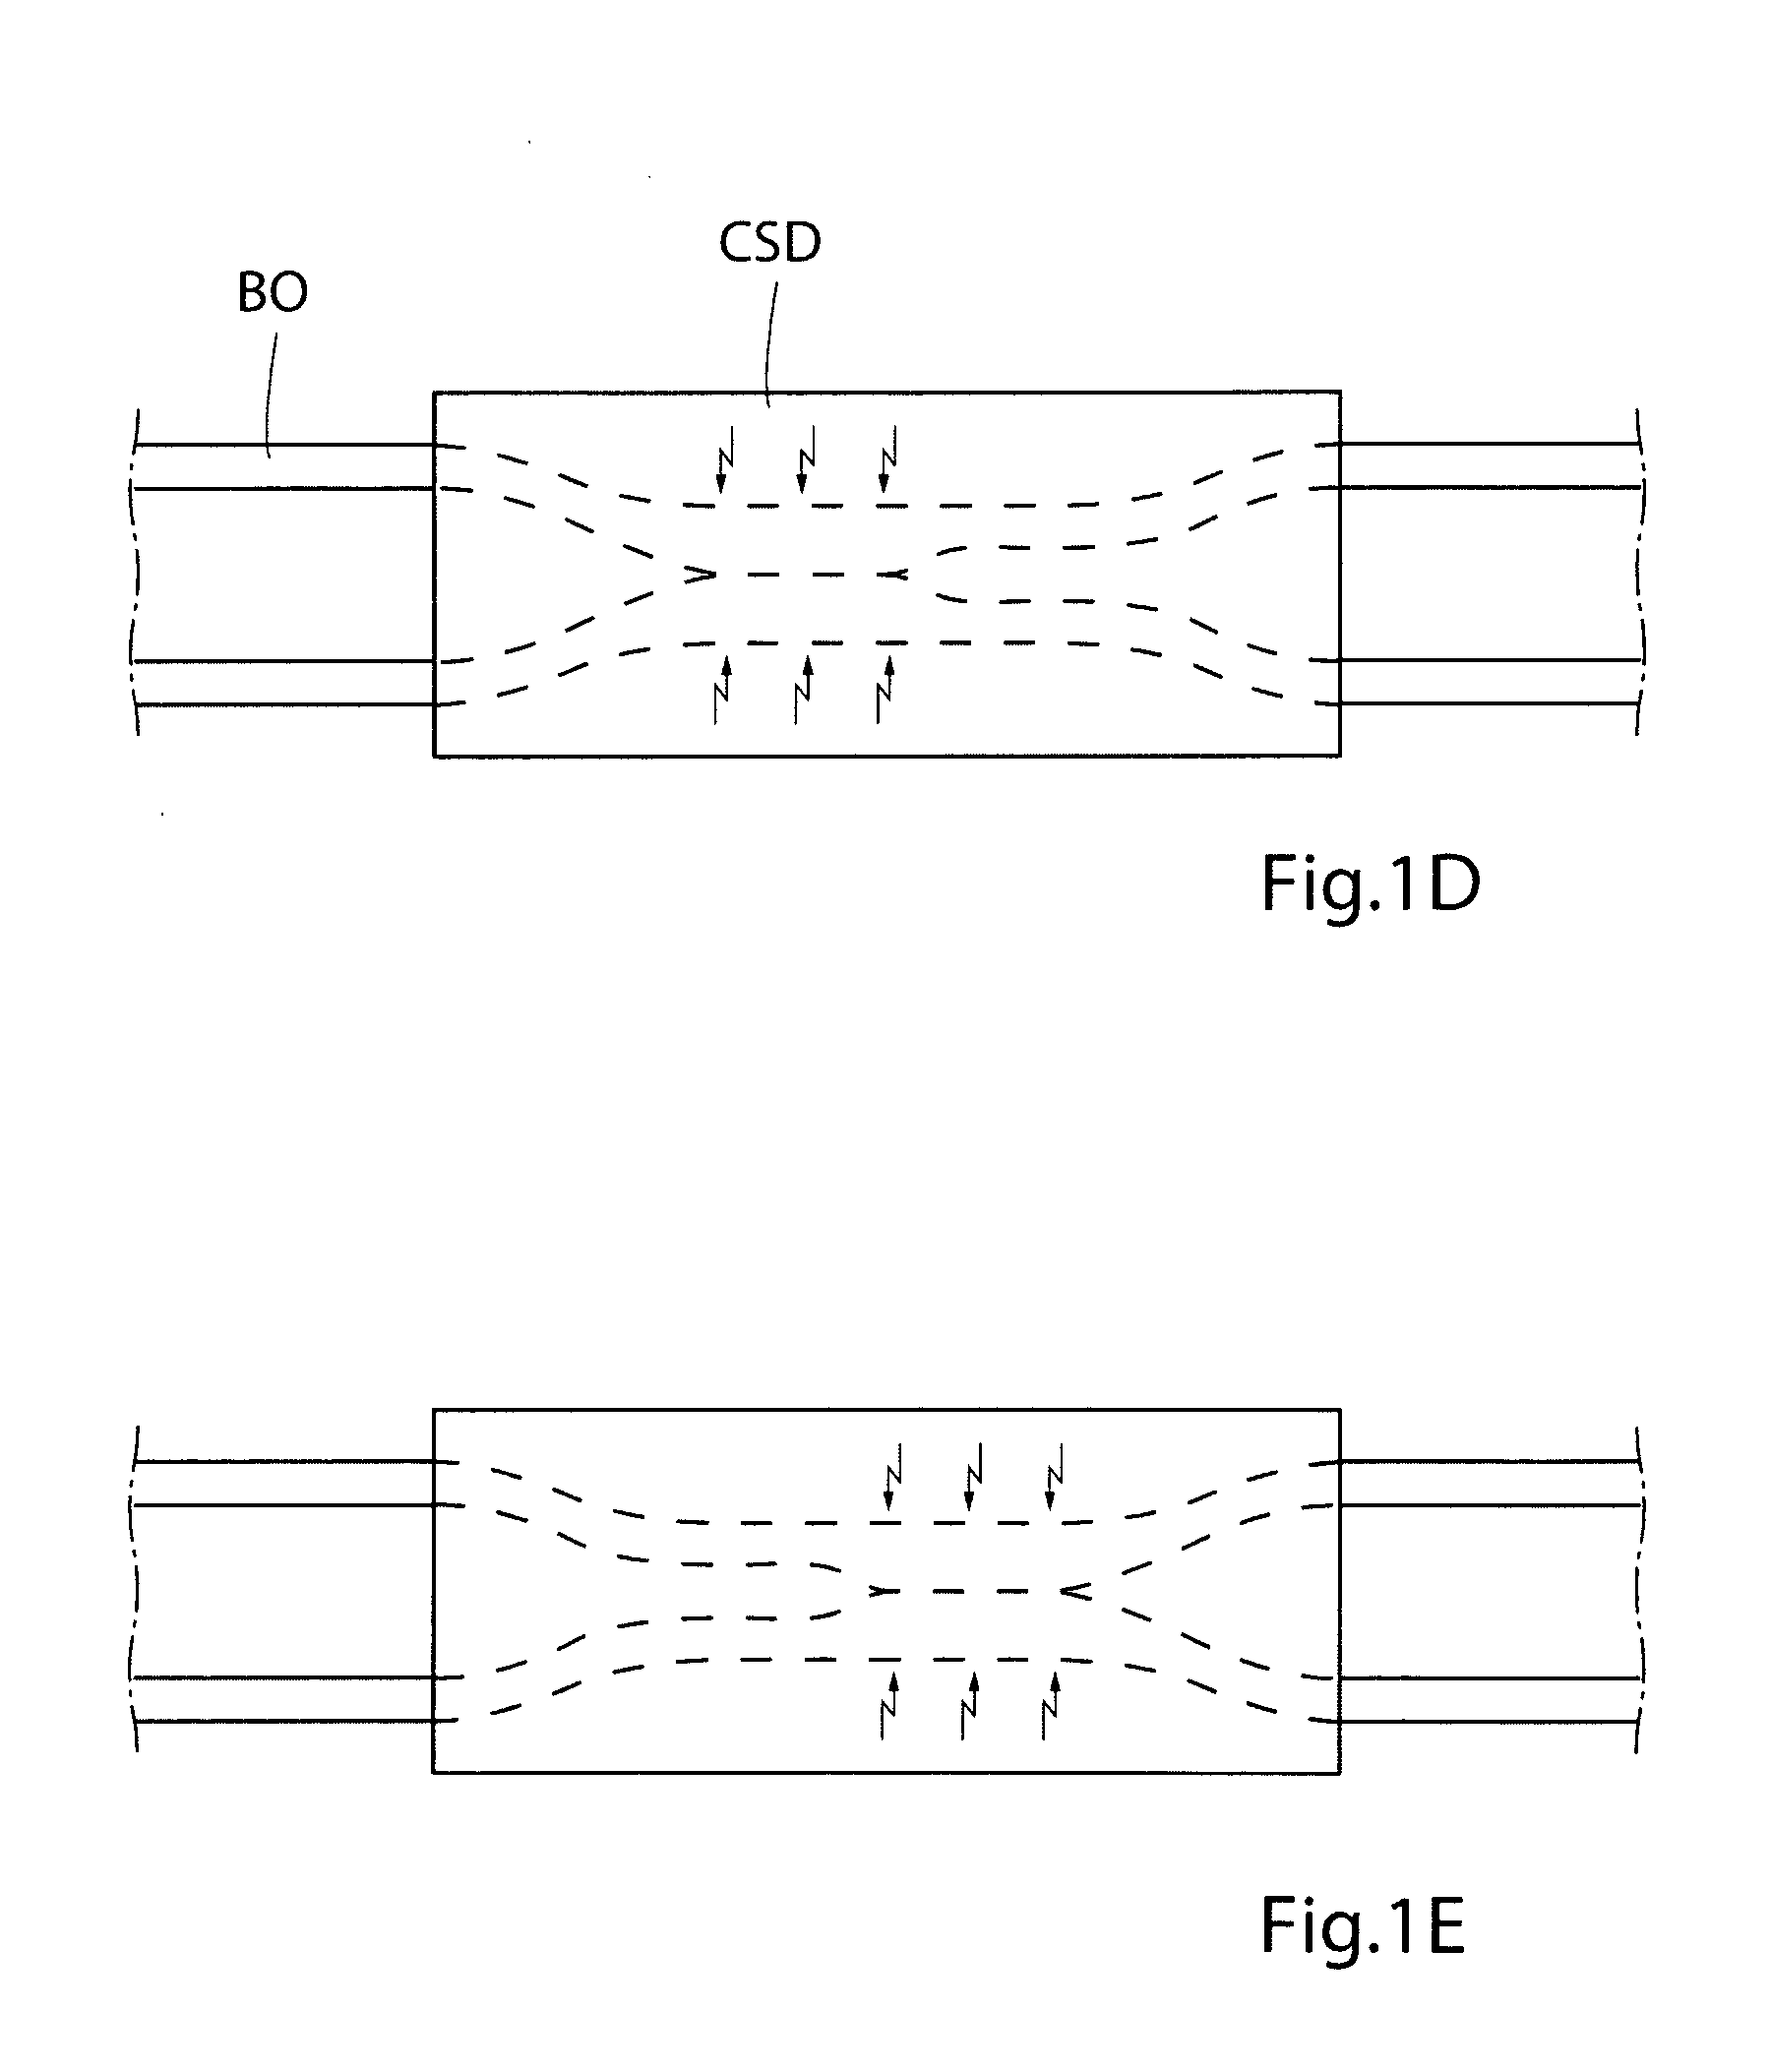 Method for controlling flow of sperms in a uterine tube